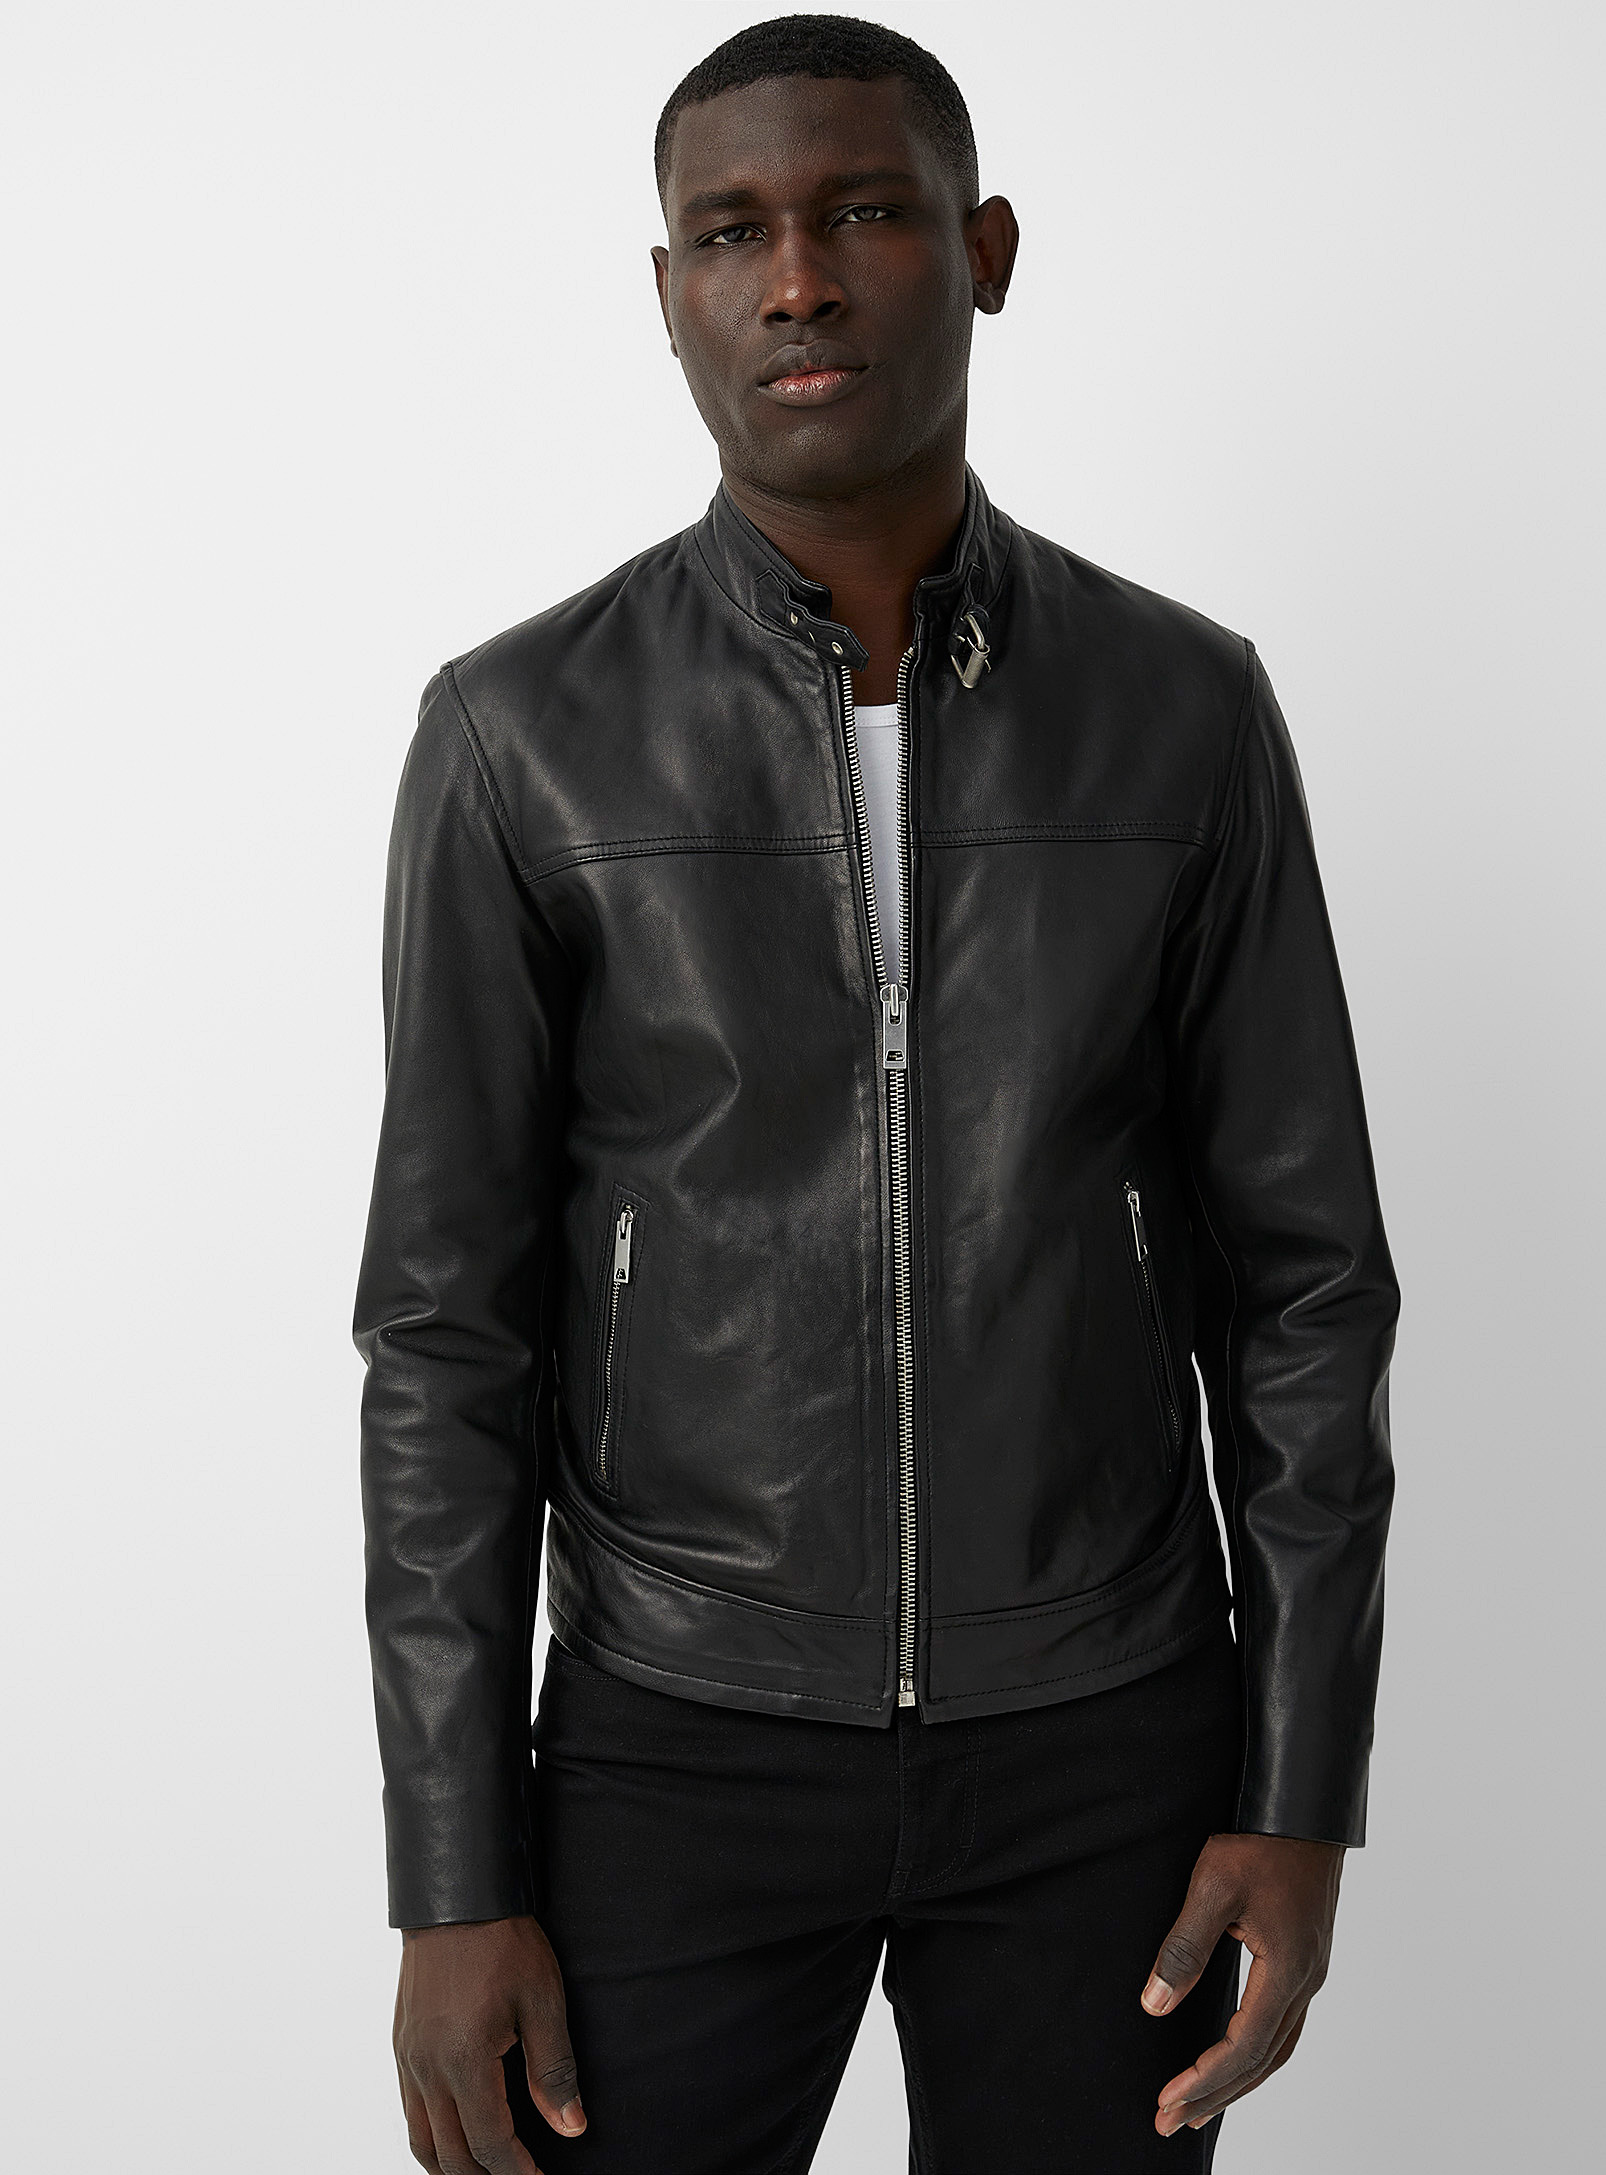 Genuine leather quilted jacket, Sly & Co, Shop Men's Leather & Suede  Jackets Online